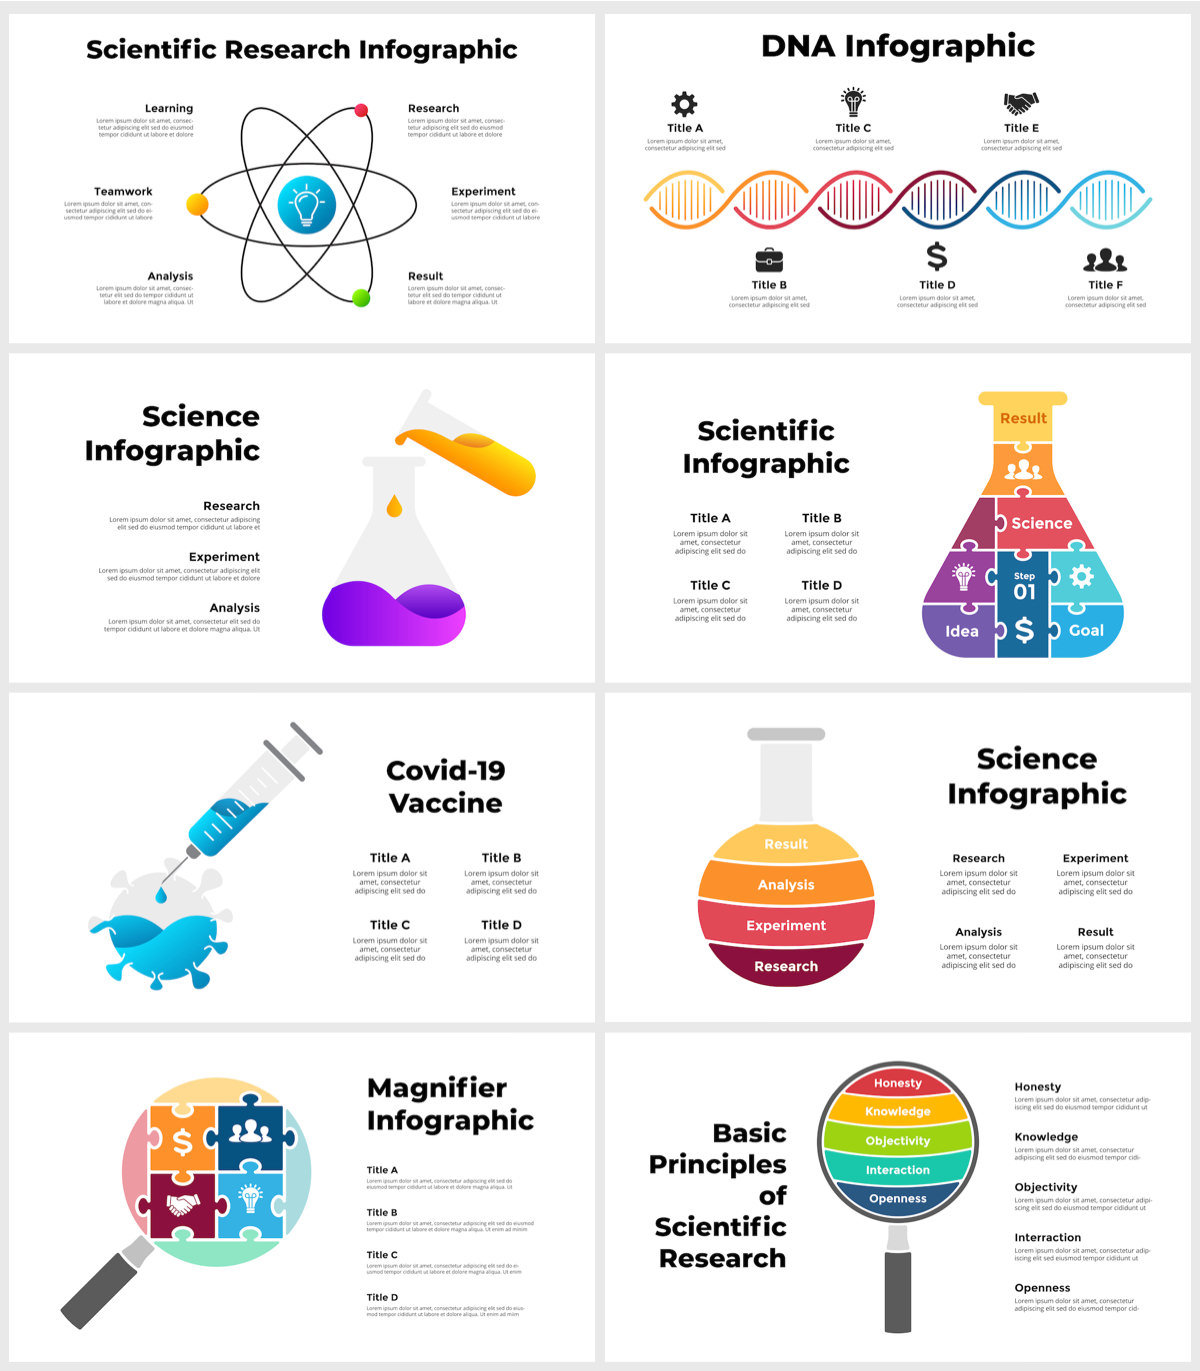 Wowly - 3500 Infographics & Presentation Templates! Updated! PowerPoint Canva Figma Sketch Ai Psd. - 175